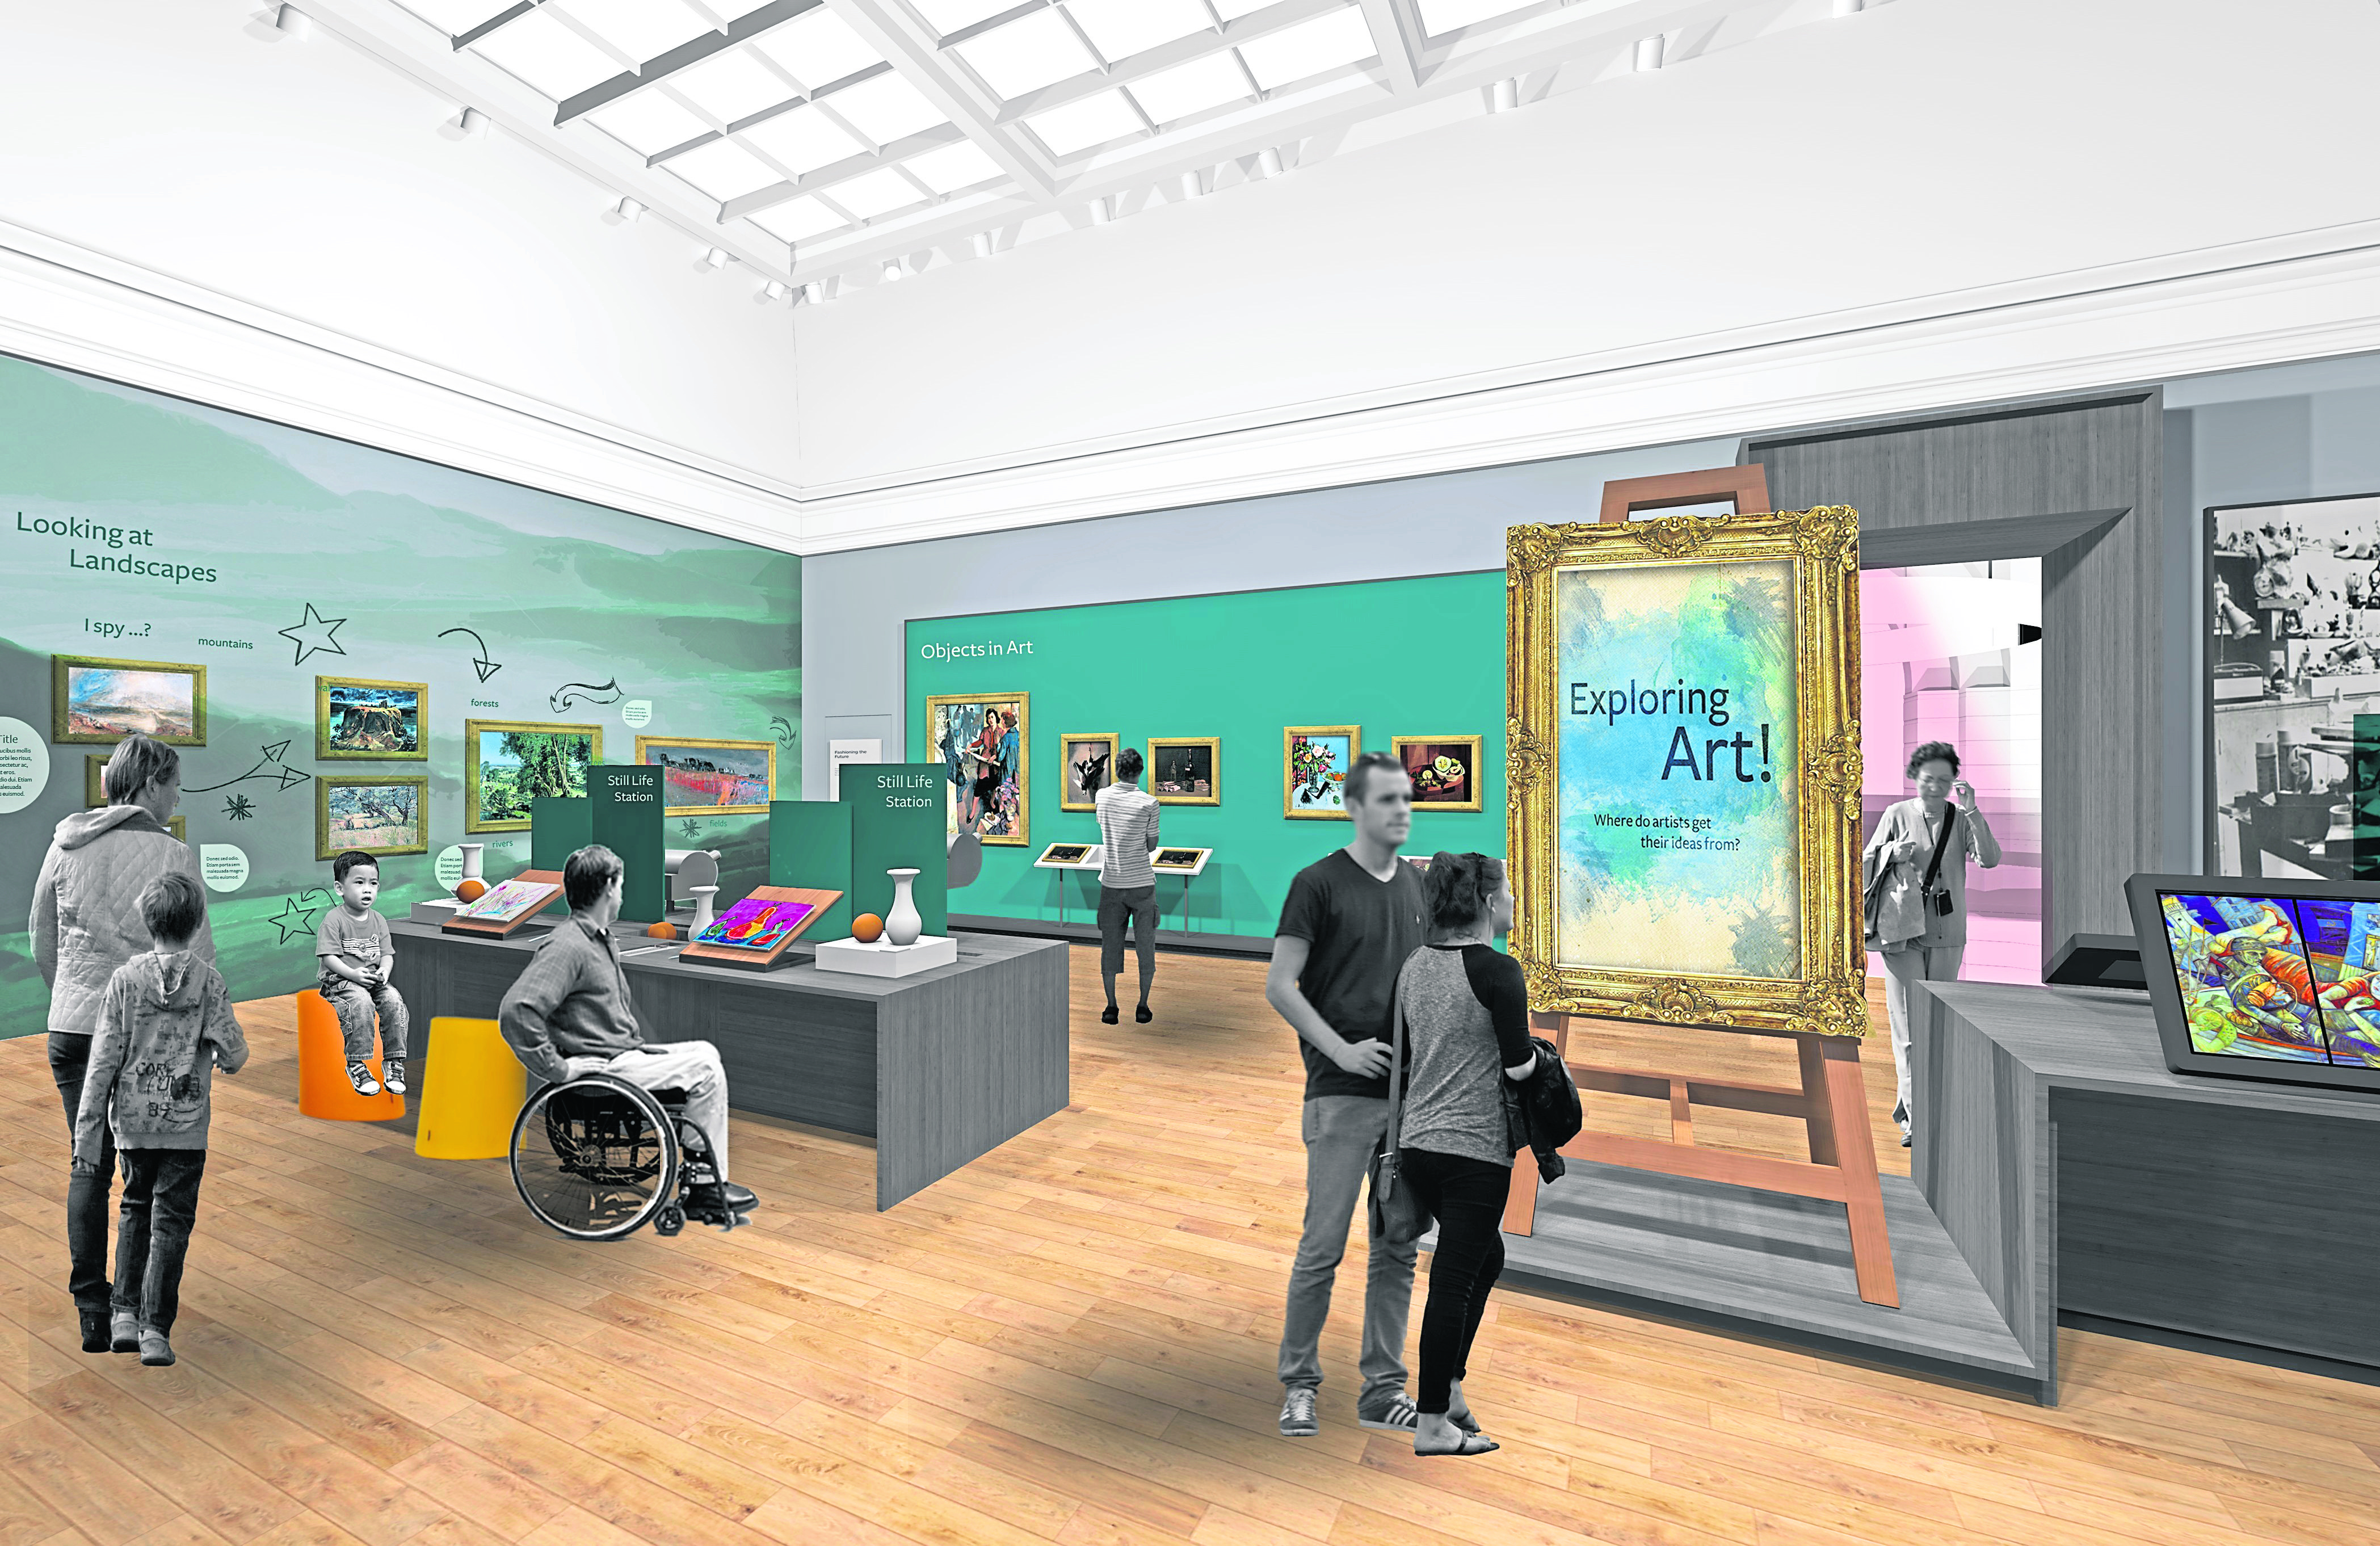 An artist impression showing how Aberdeen Art Gallery could look.